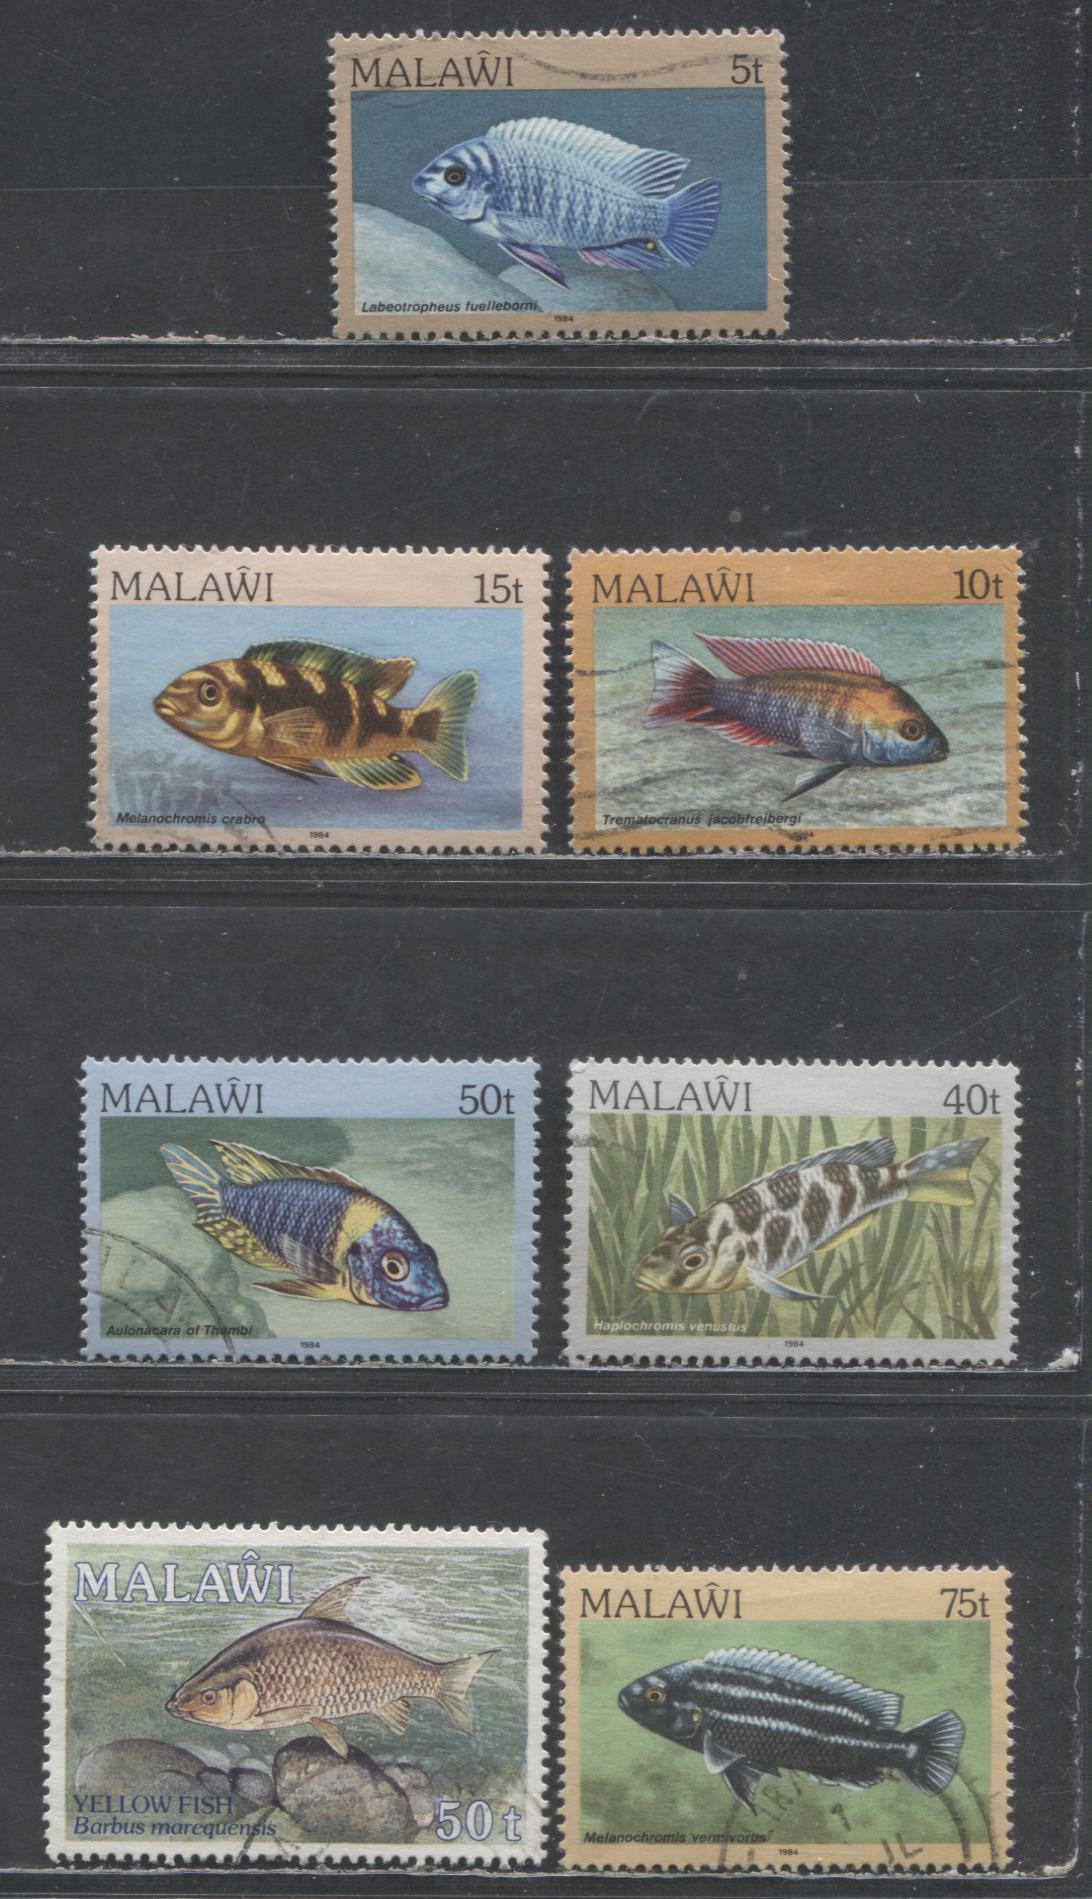 Lot 77 Malawi SC#429/544 1984-1989 Fish Issues, 7 Very Fine Used Singles, Click on Listing to See ALL Pictures, 2017 Scott Cat. $10.5